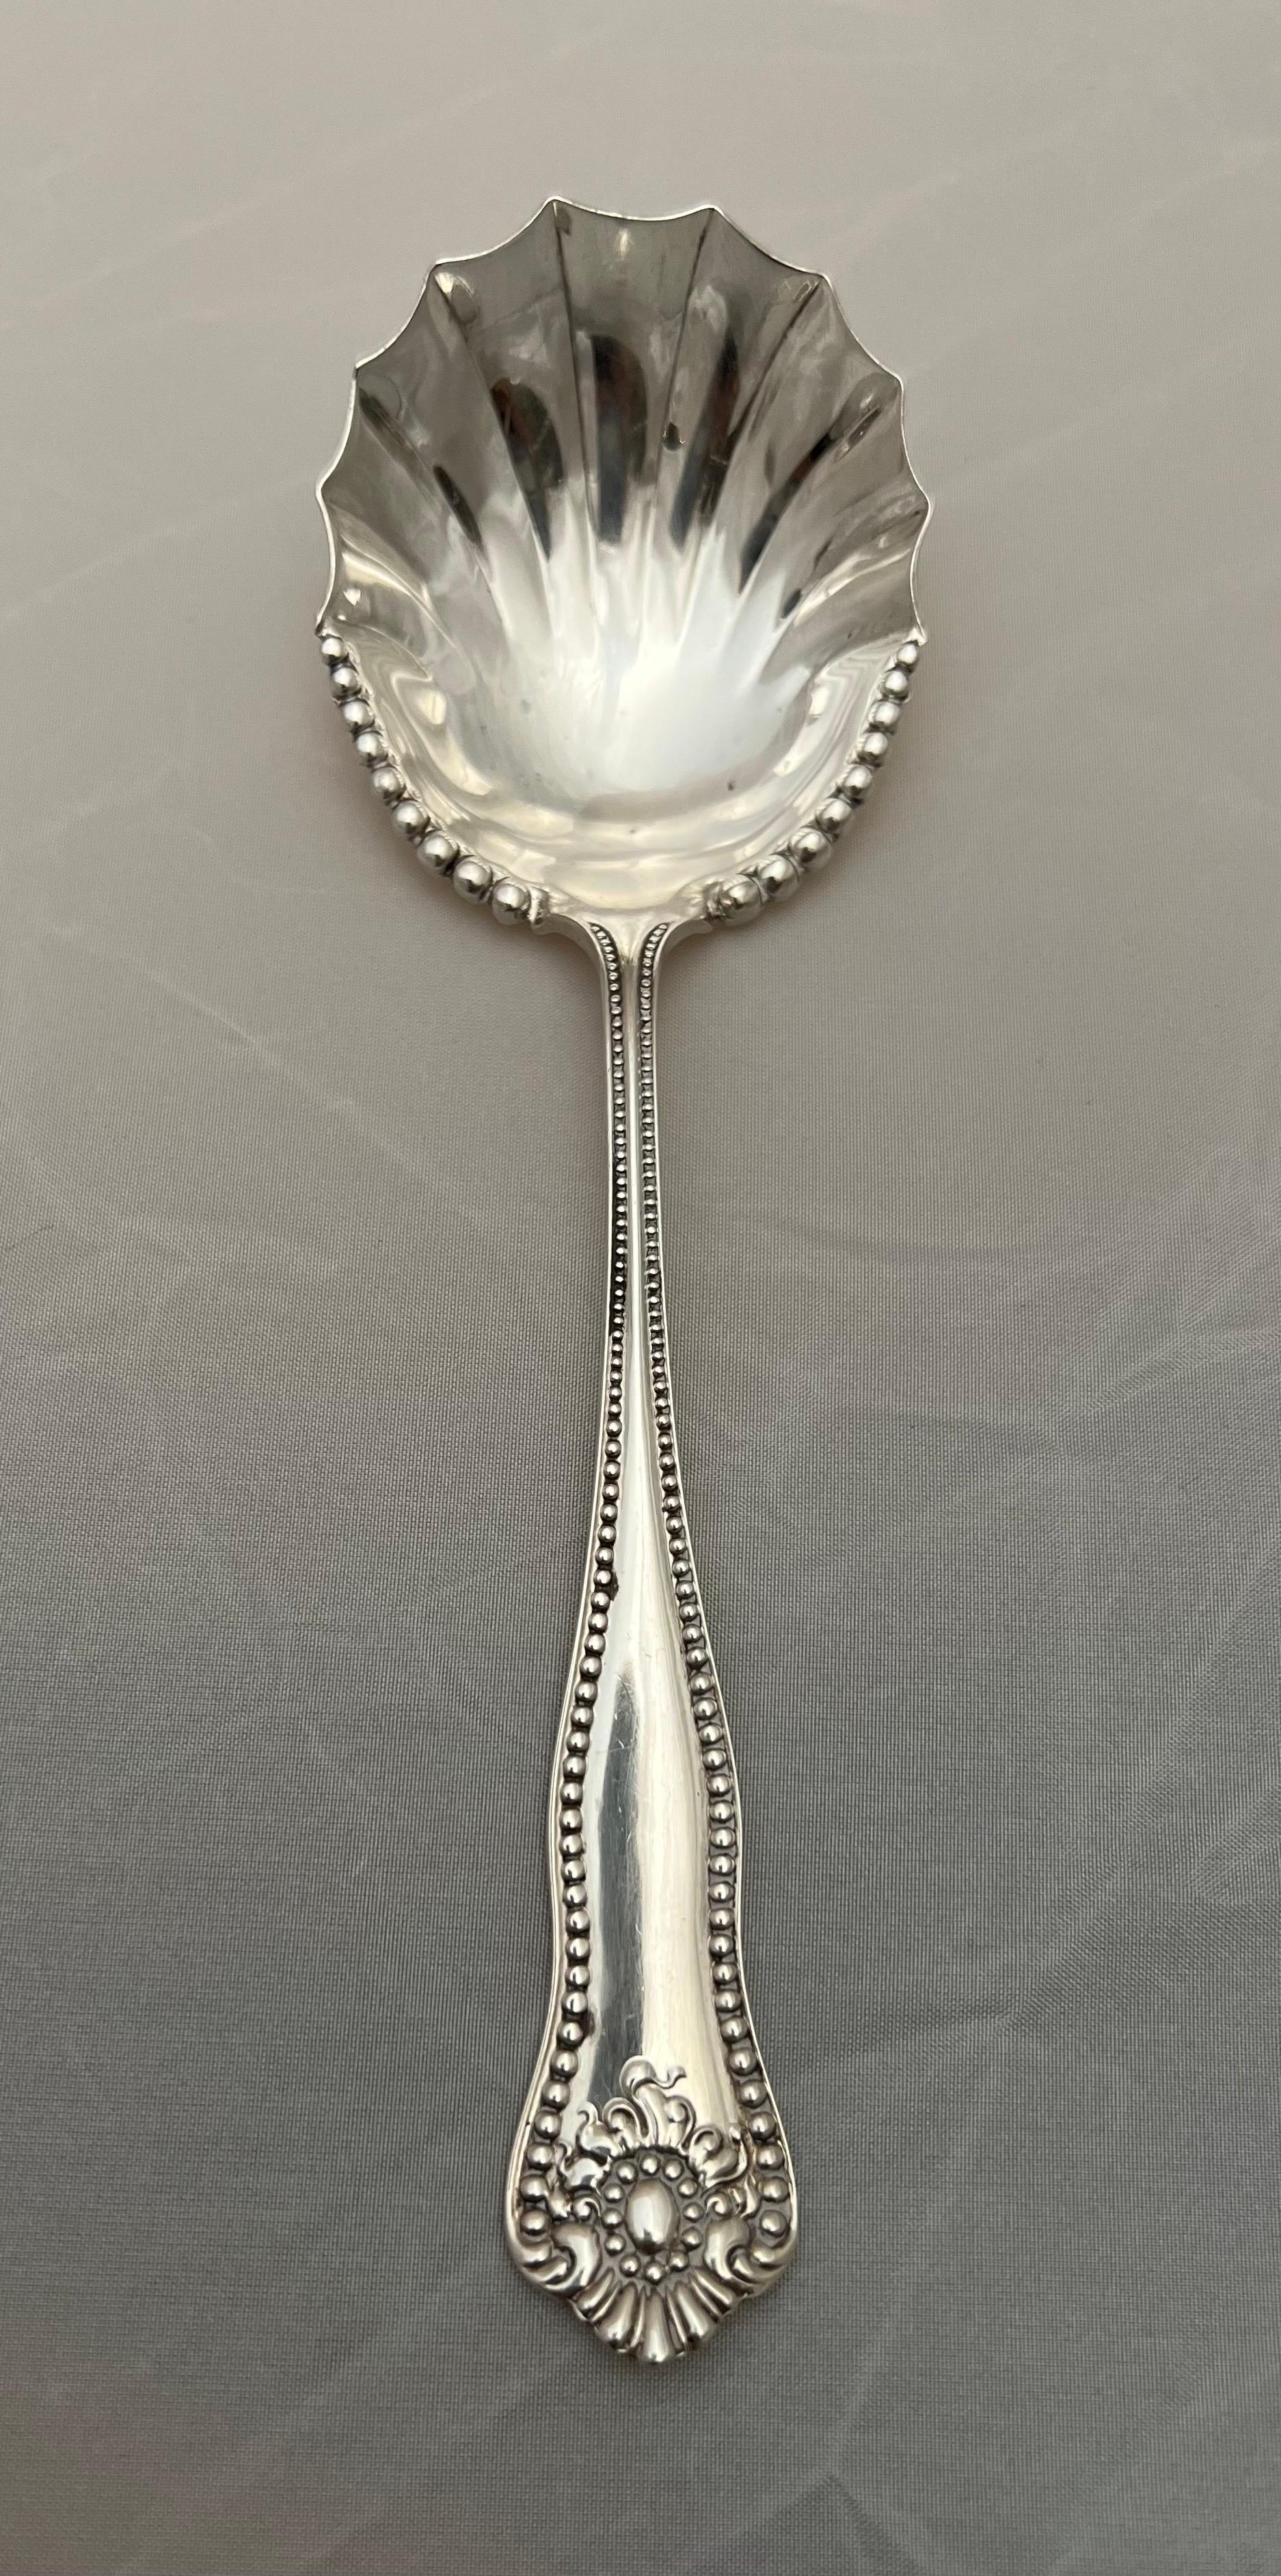 Sterling silver scalloped shaped serving spoon. Sterling is stamped on the back of the spoon as depicted in photos.